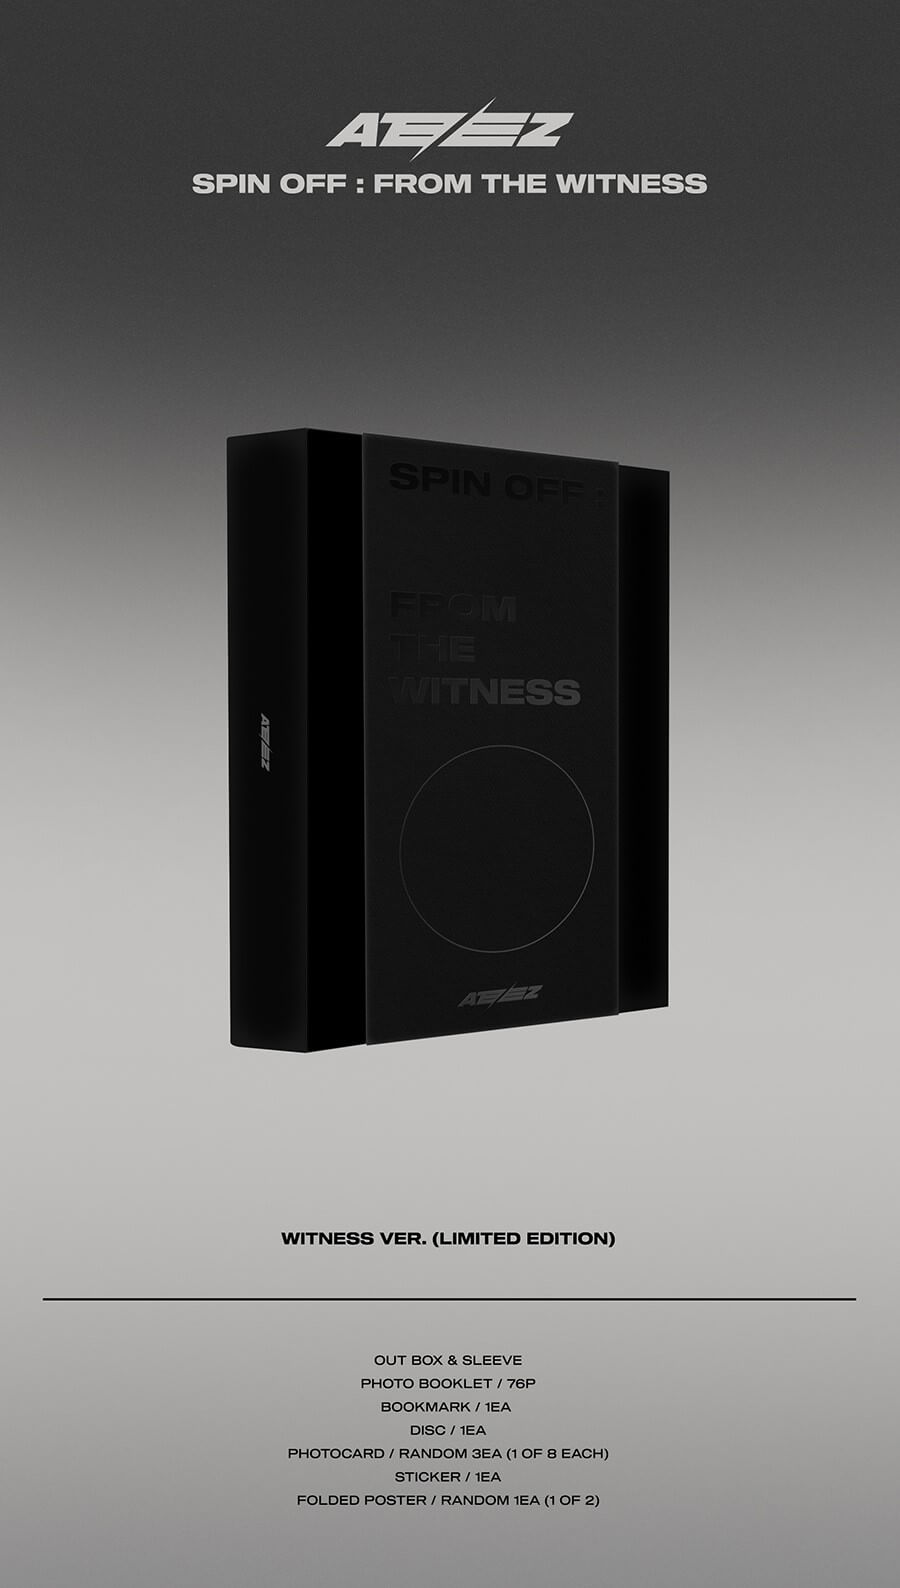 ATEEZ SPIN OFF: FROM THE WITNESS Limited Edition - WITNESS Version Album Info